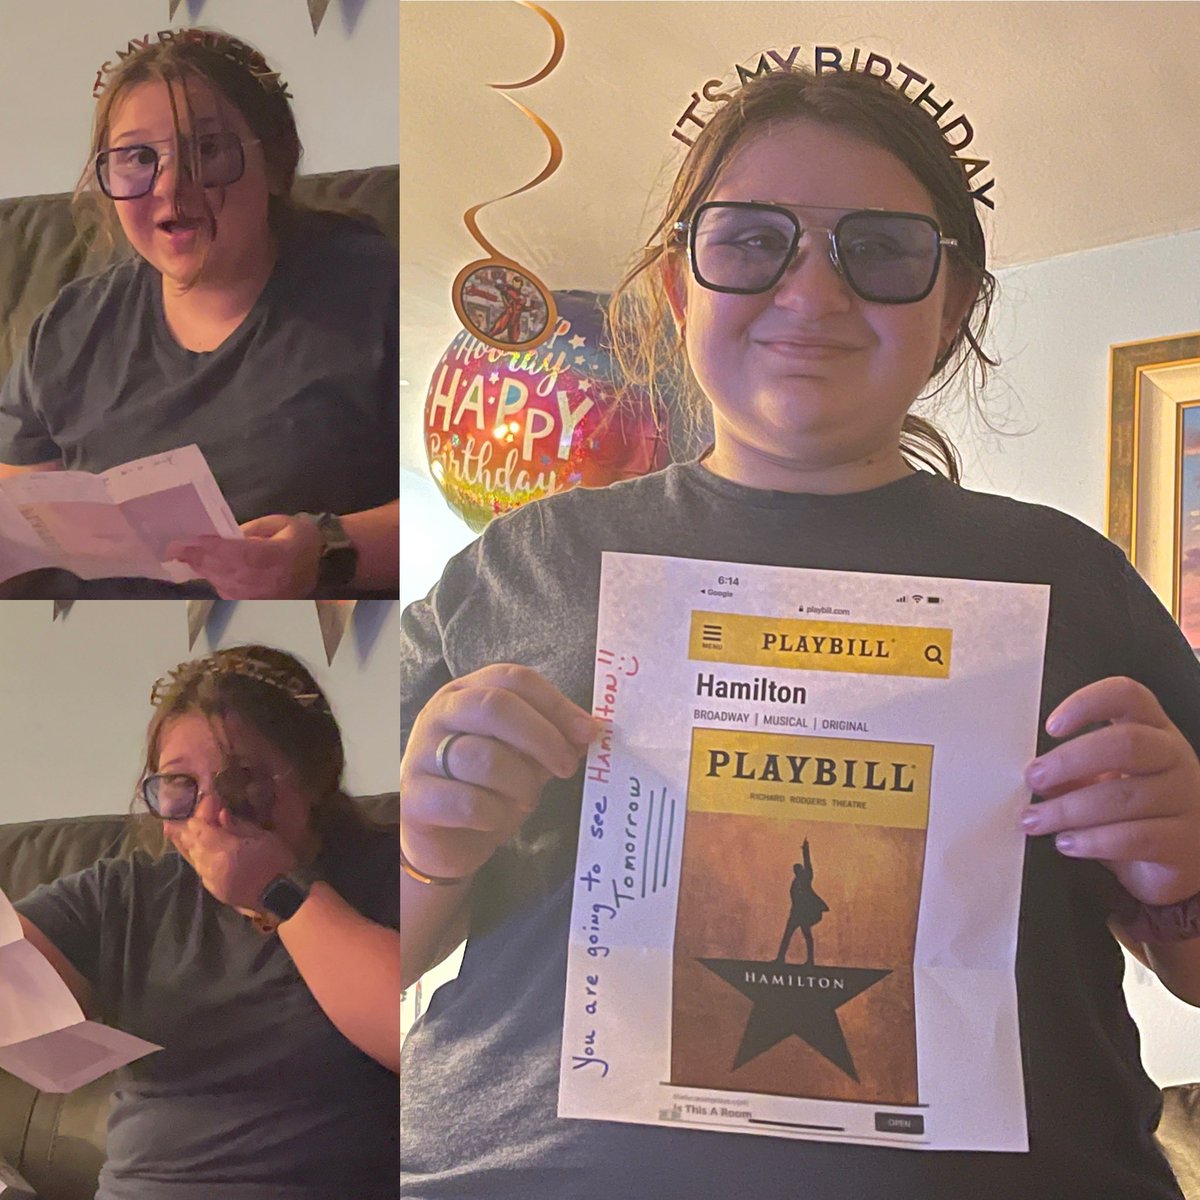 Last year we celebrated her turning 10 with a Hamilton themed party and a cameo from @jamesmiglehart. Tonight for her 11th she found out she is seeing @HamiltonMusical (she has no clue @jamesmiglehart is in it that’s a surprise for tomorrow)!!! #broadwayisback